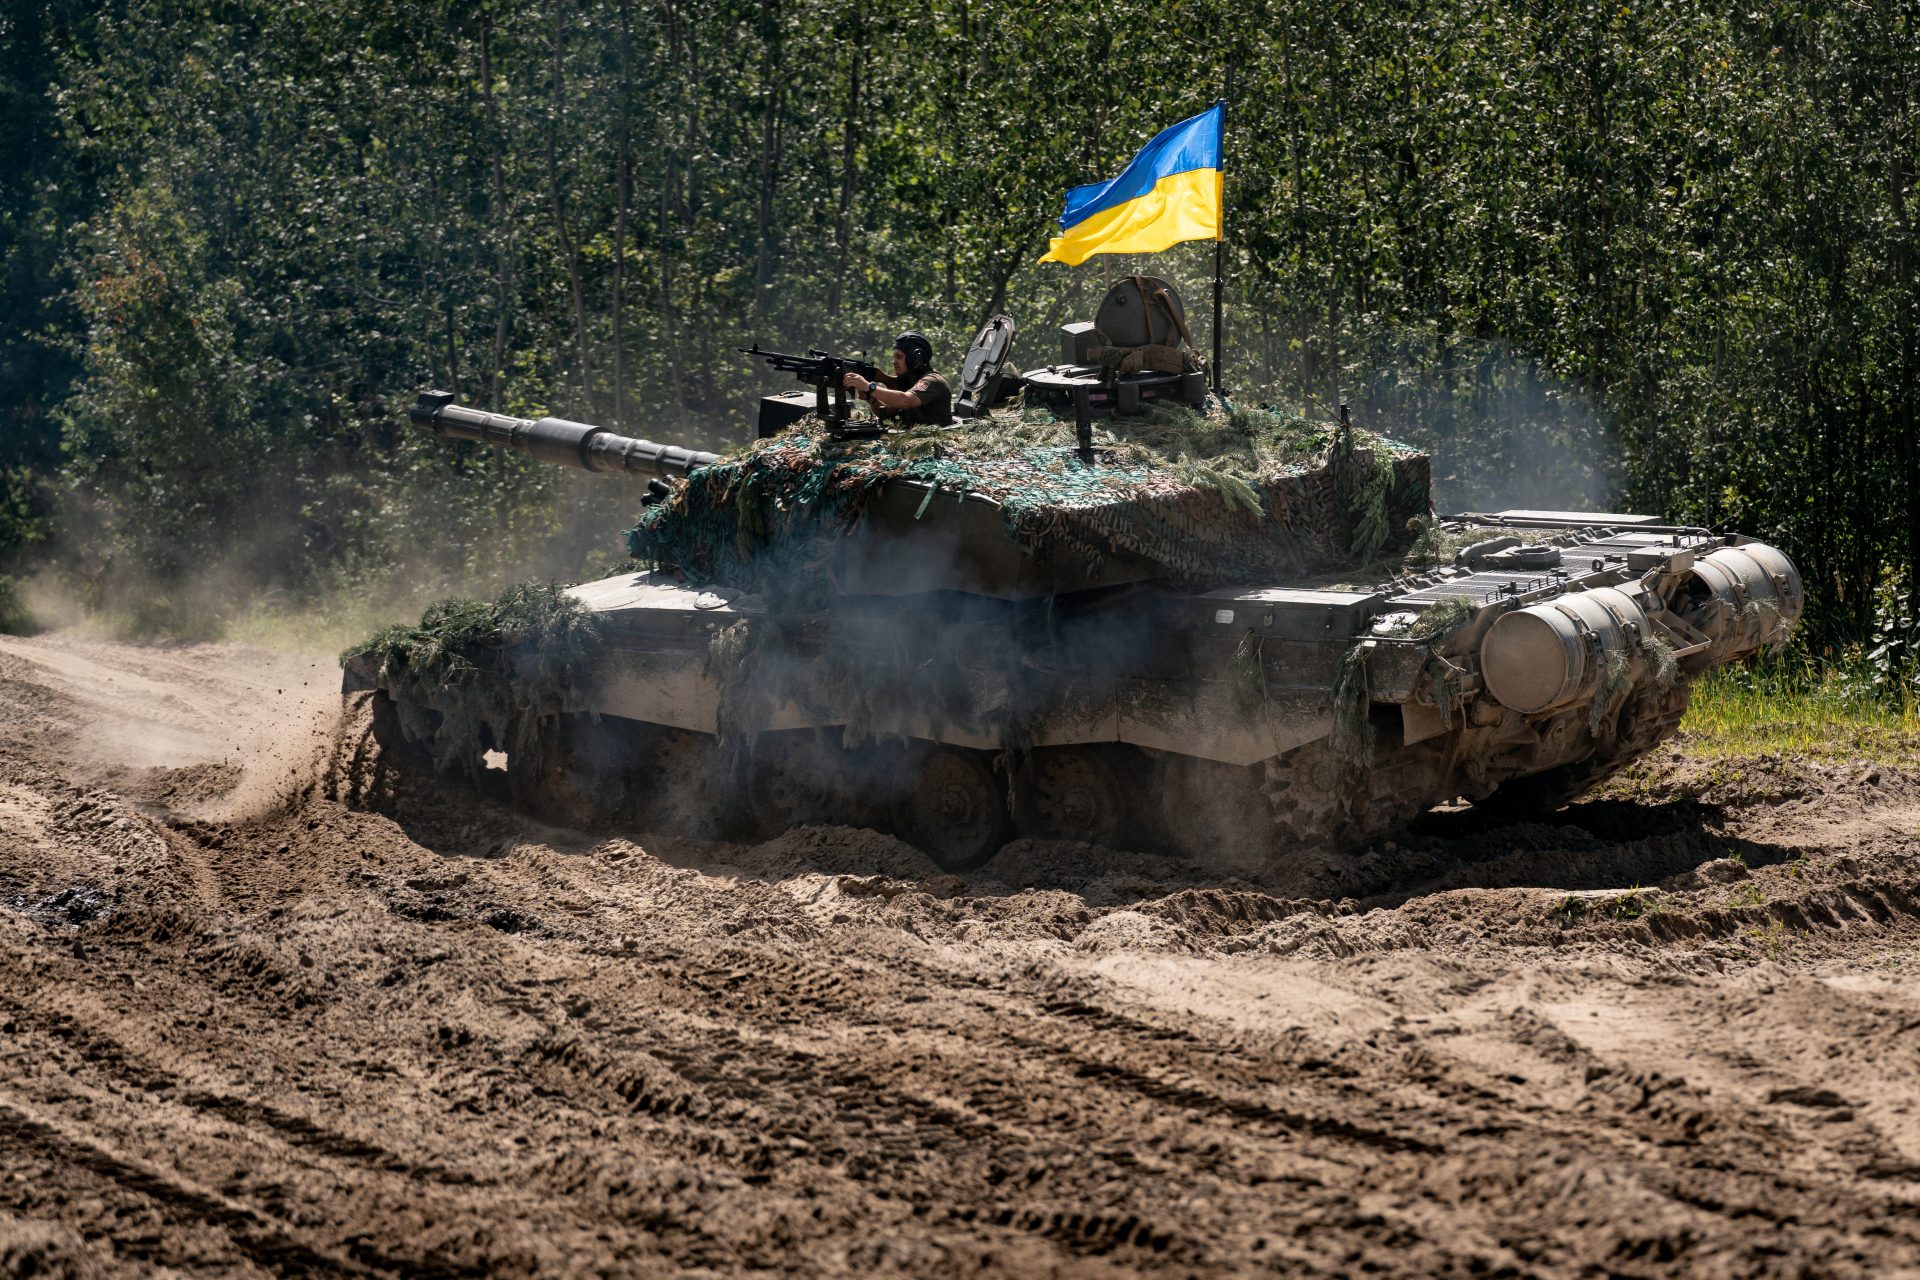 Russia could outgun Ukraine 10 to 1 in a matter of weeks, US general says